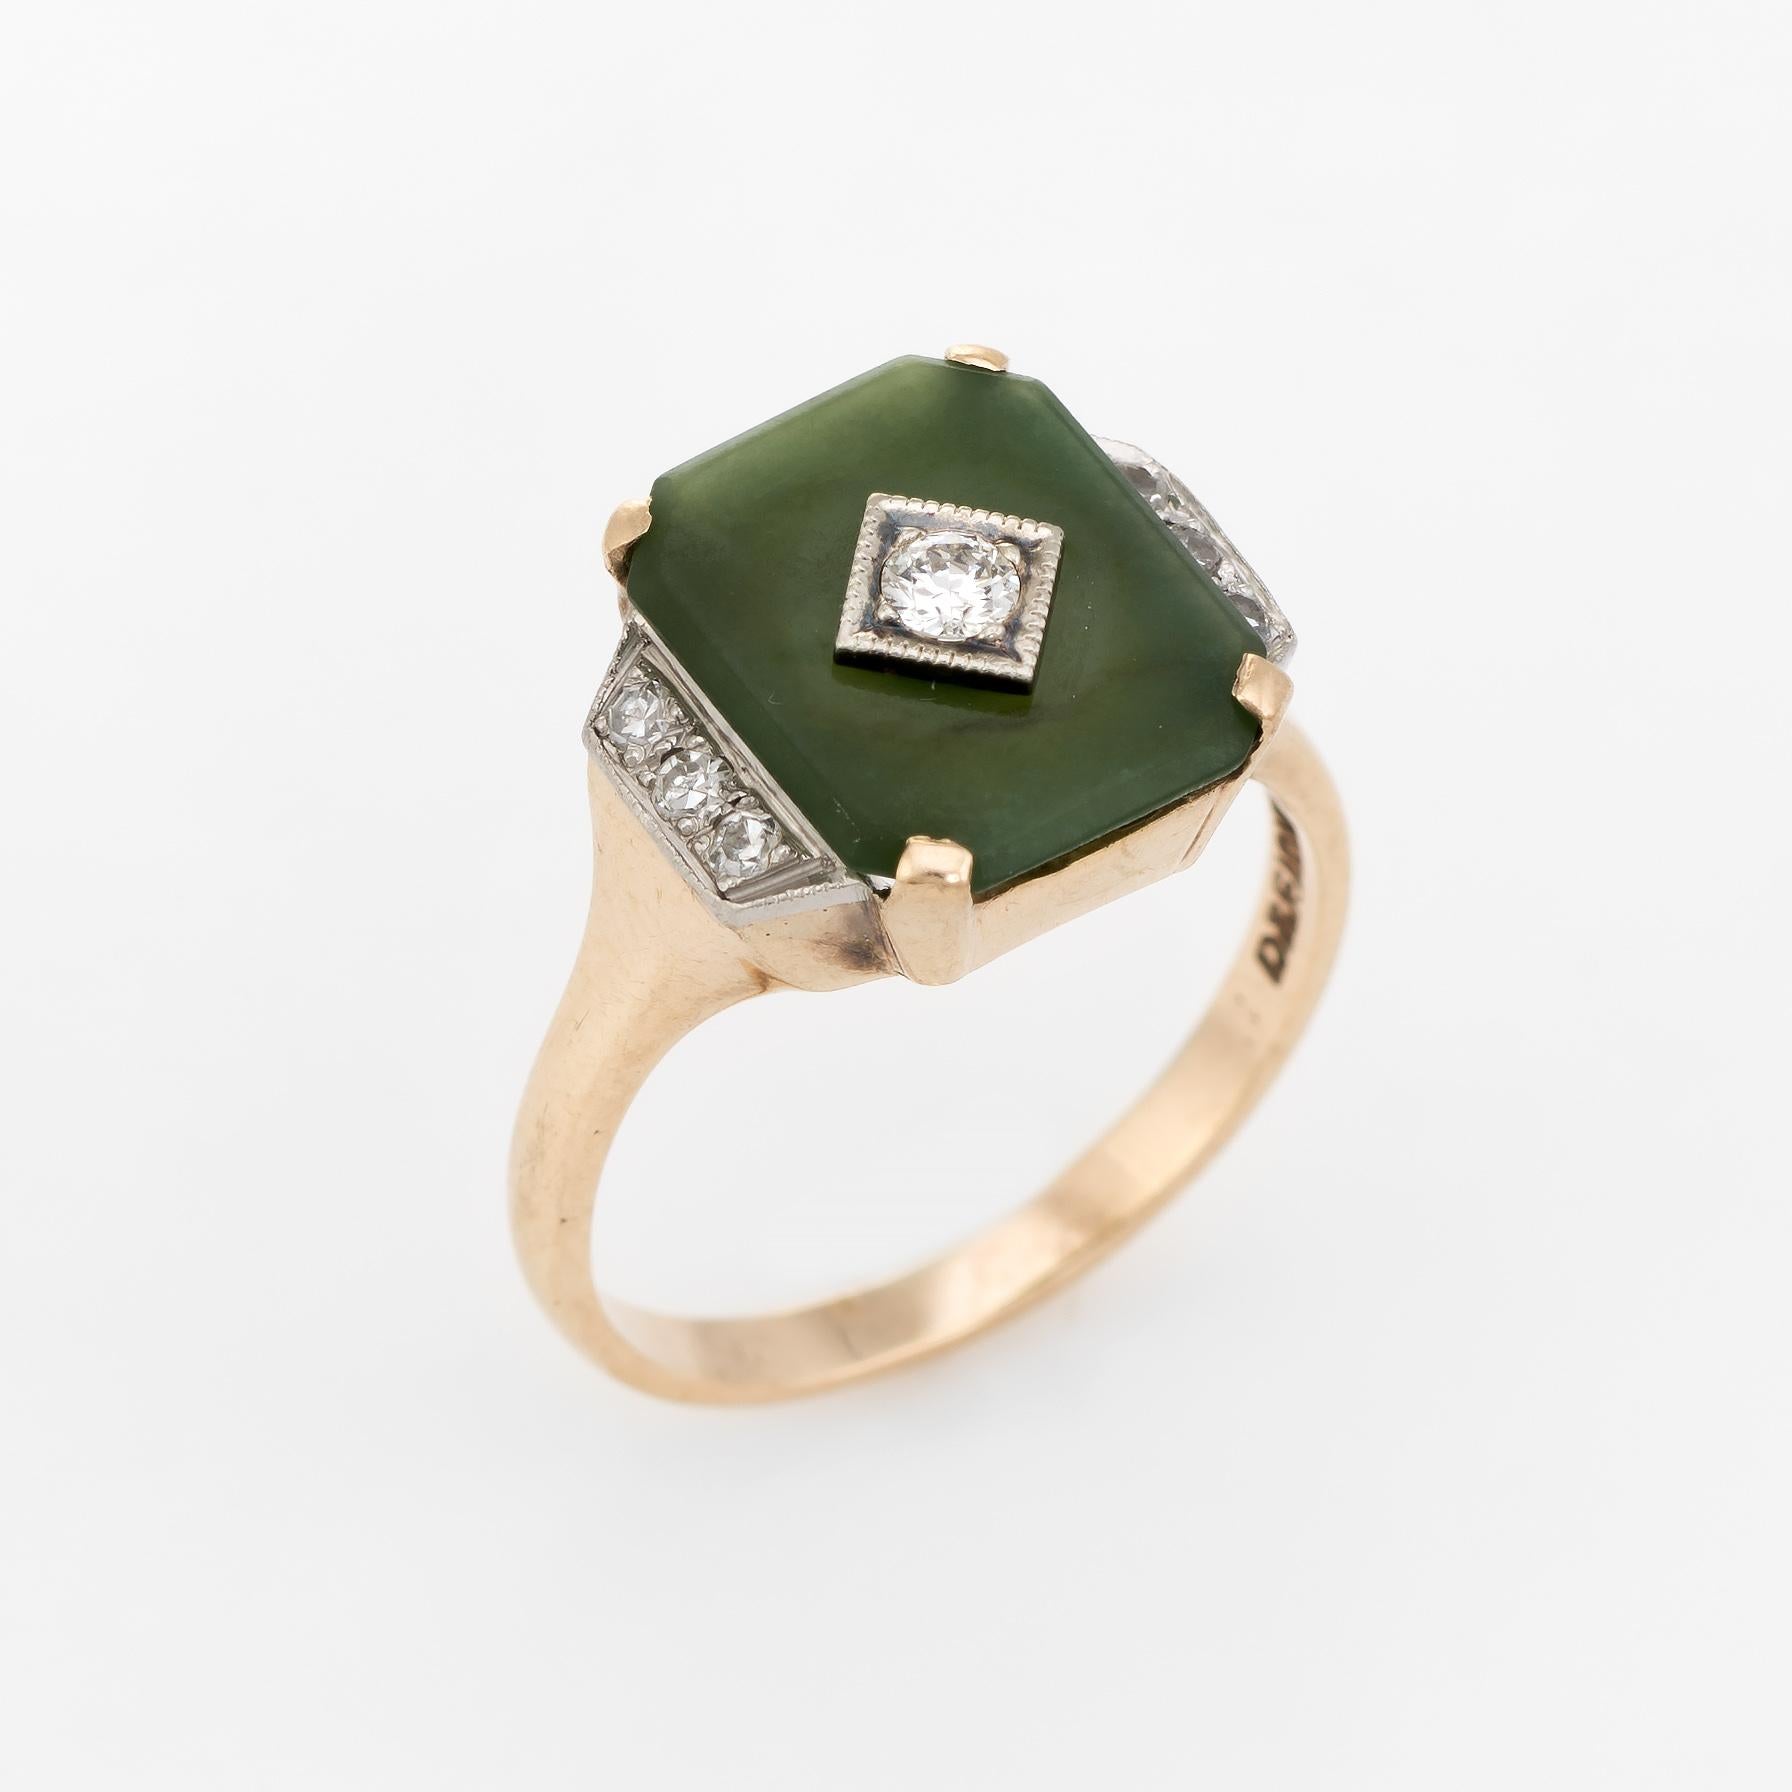 Finely detailed vintage Art Deco era cocktail ring (circa 1920s to 1930s), crafted in 910 karat yellow gold. 

Centrally mounted estimated 0.08 carat old European cut diamond is flanked with a further siz estimated 0.01 carat single cut diamonds.